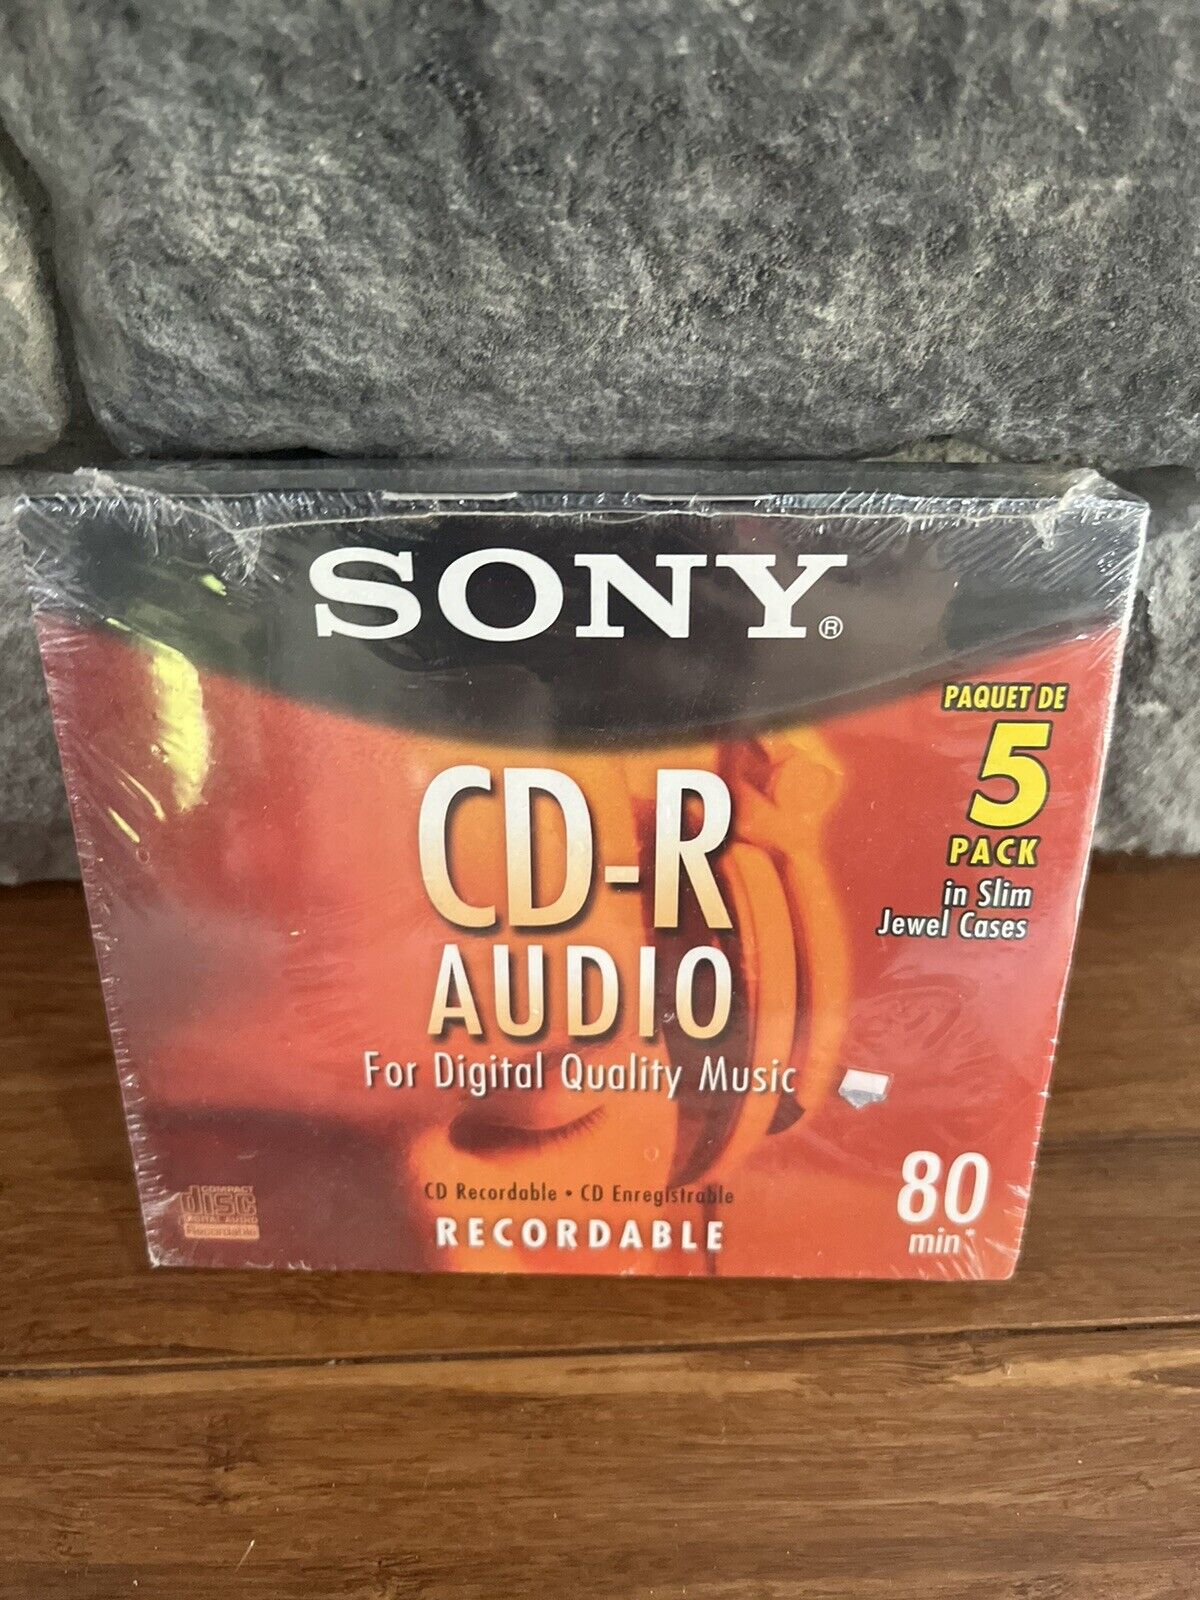 New Sealed Sony CD-R Audio Music 5 CDs Pack Recordable In Slim Jewel Cases 